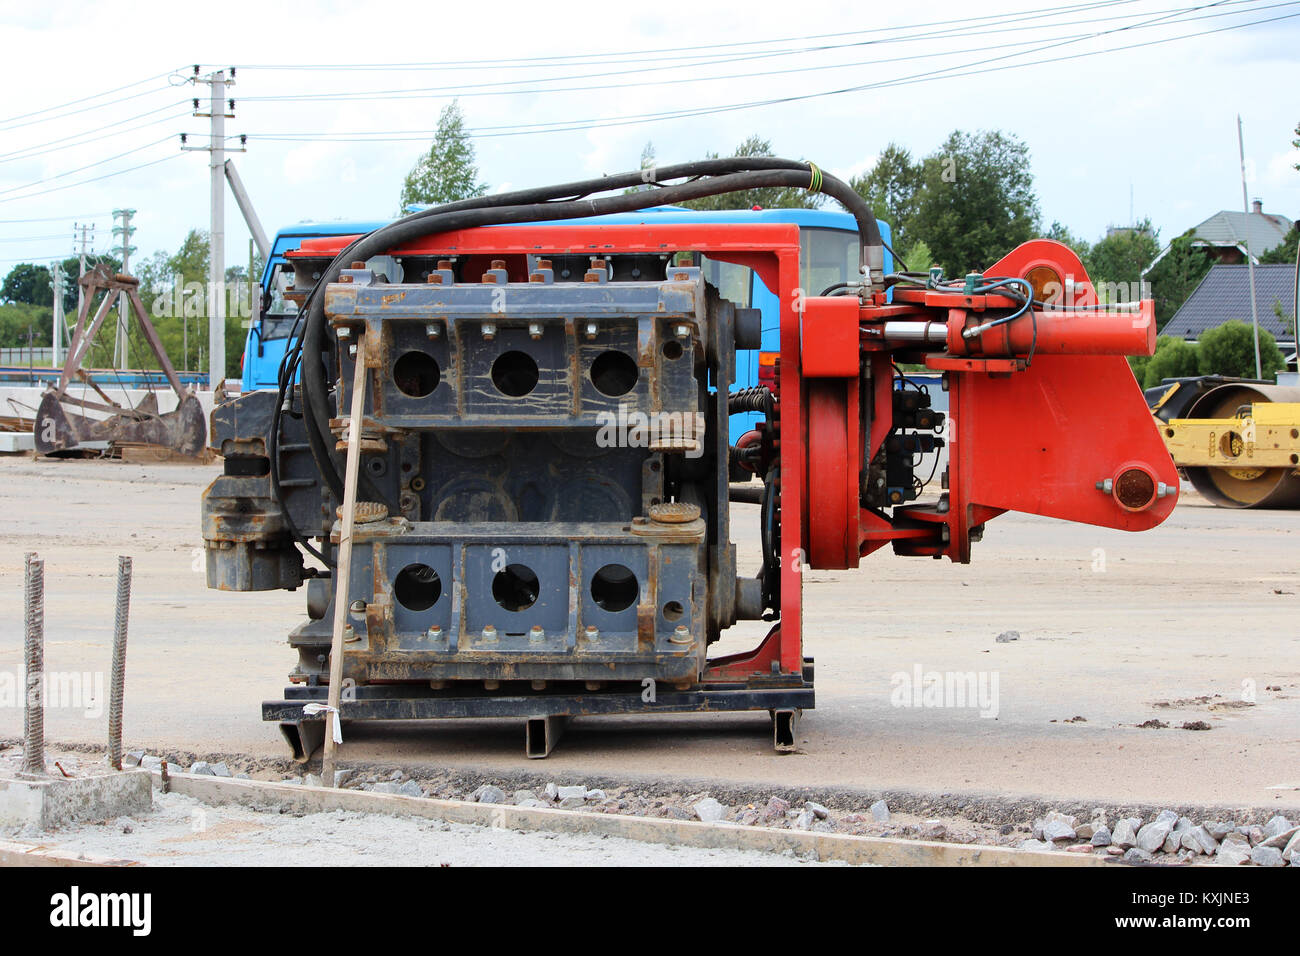 Vibrator pile driving Machine or vibro hammer stands on the site of construction of a major road junction. Russia Stock Photo